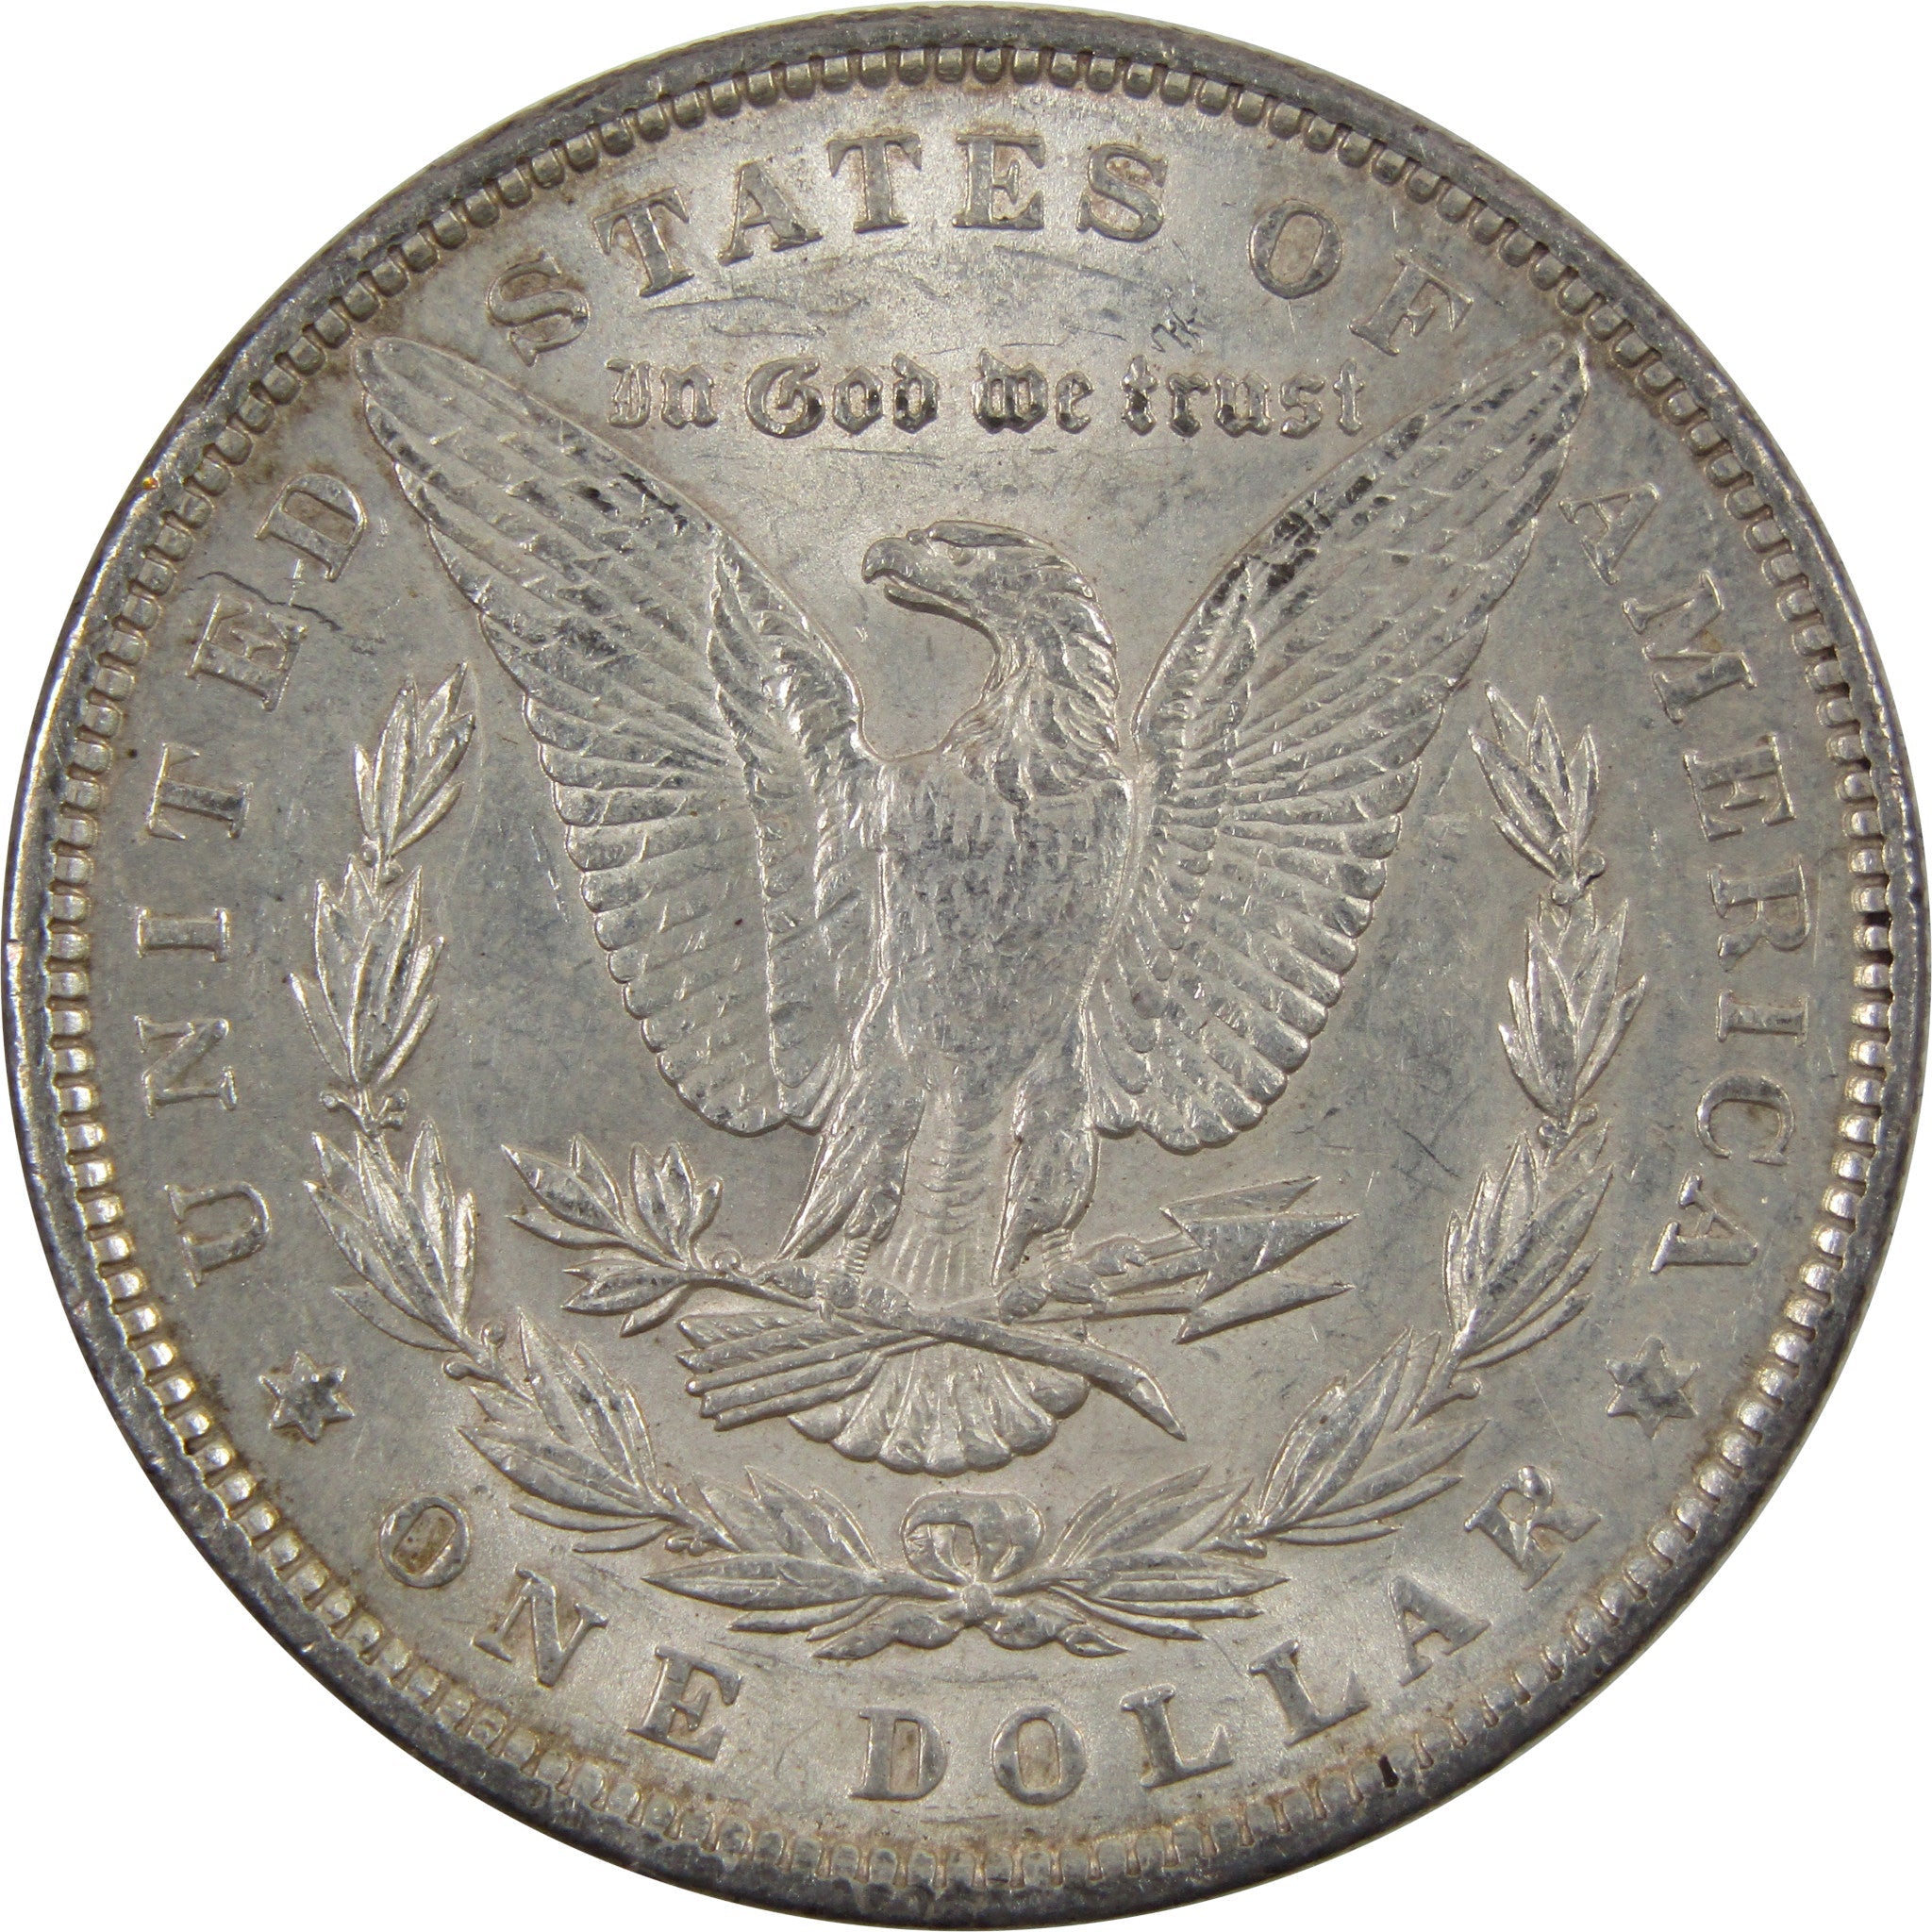 1896 Morgan Dollar AU About Uncirculated 90% Silver $1 Coin SKU:I5530 - Morgan coin - Morgan silver dollar - Morgan silver dollar for sale - Profile Coins &amp; Collectibles